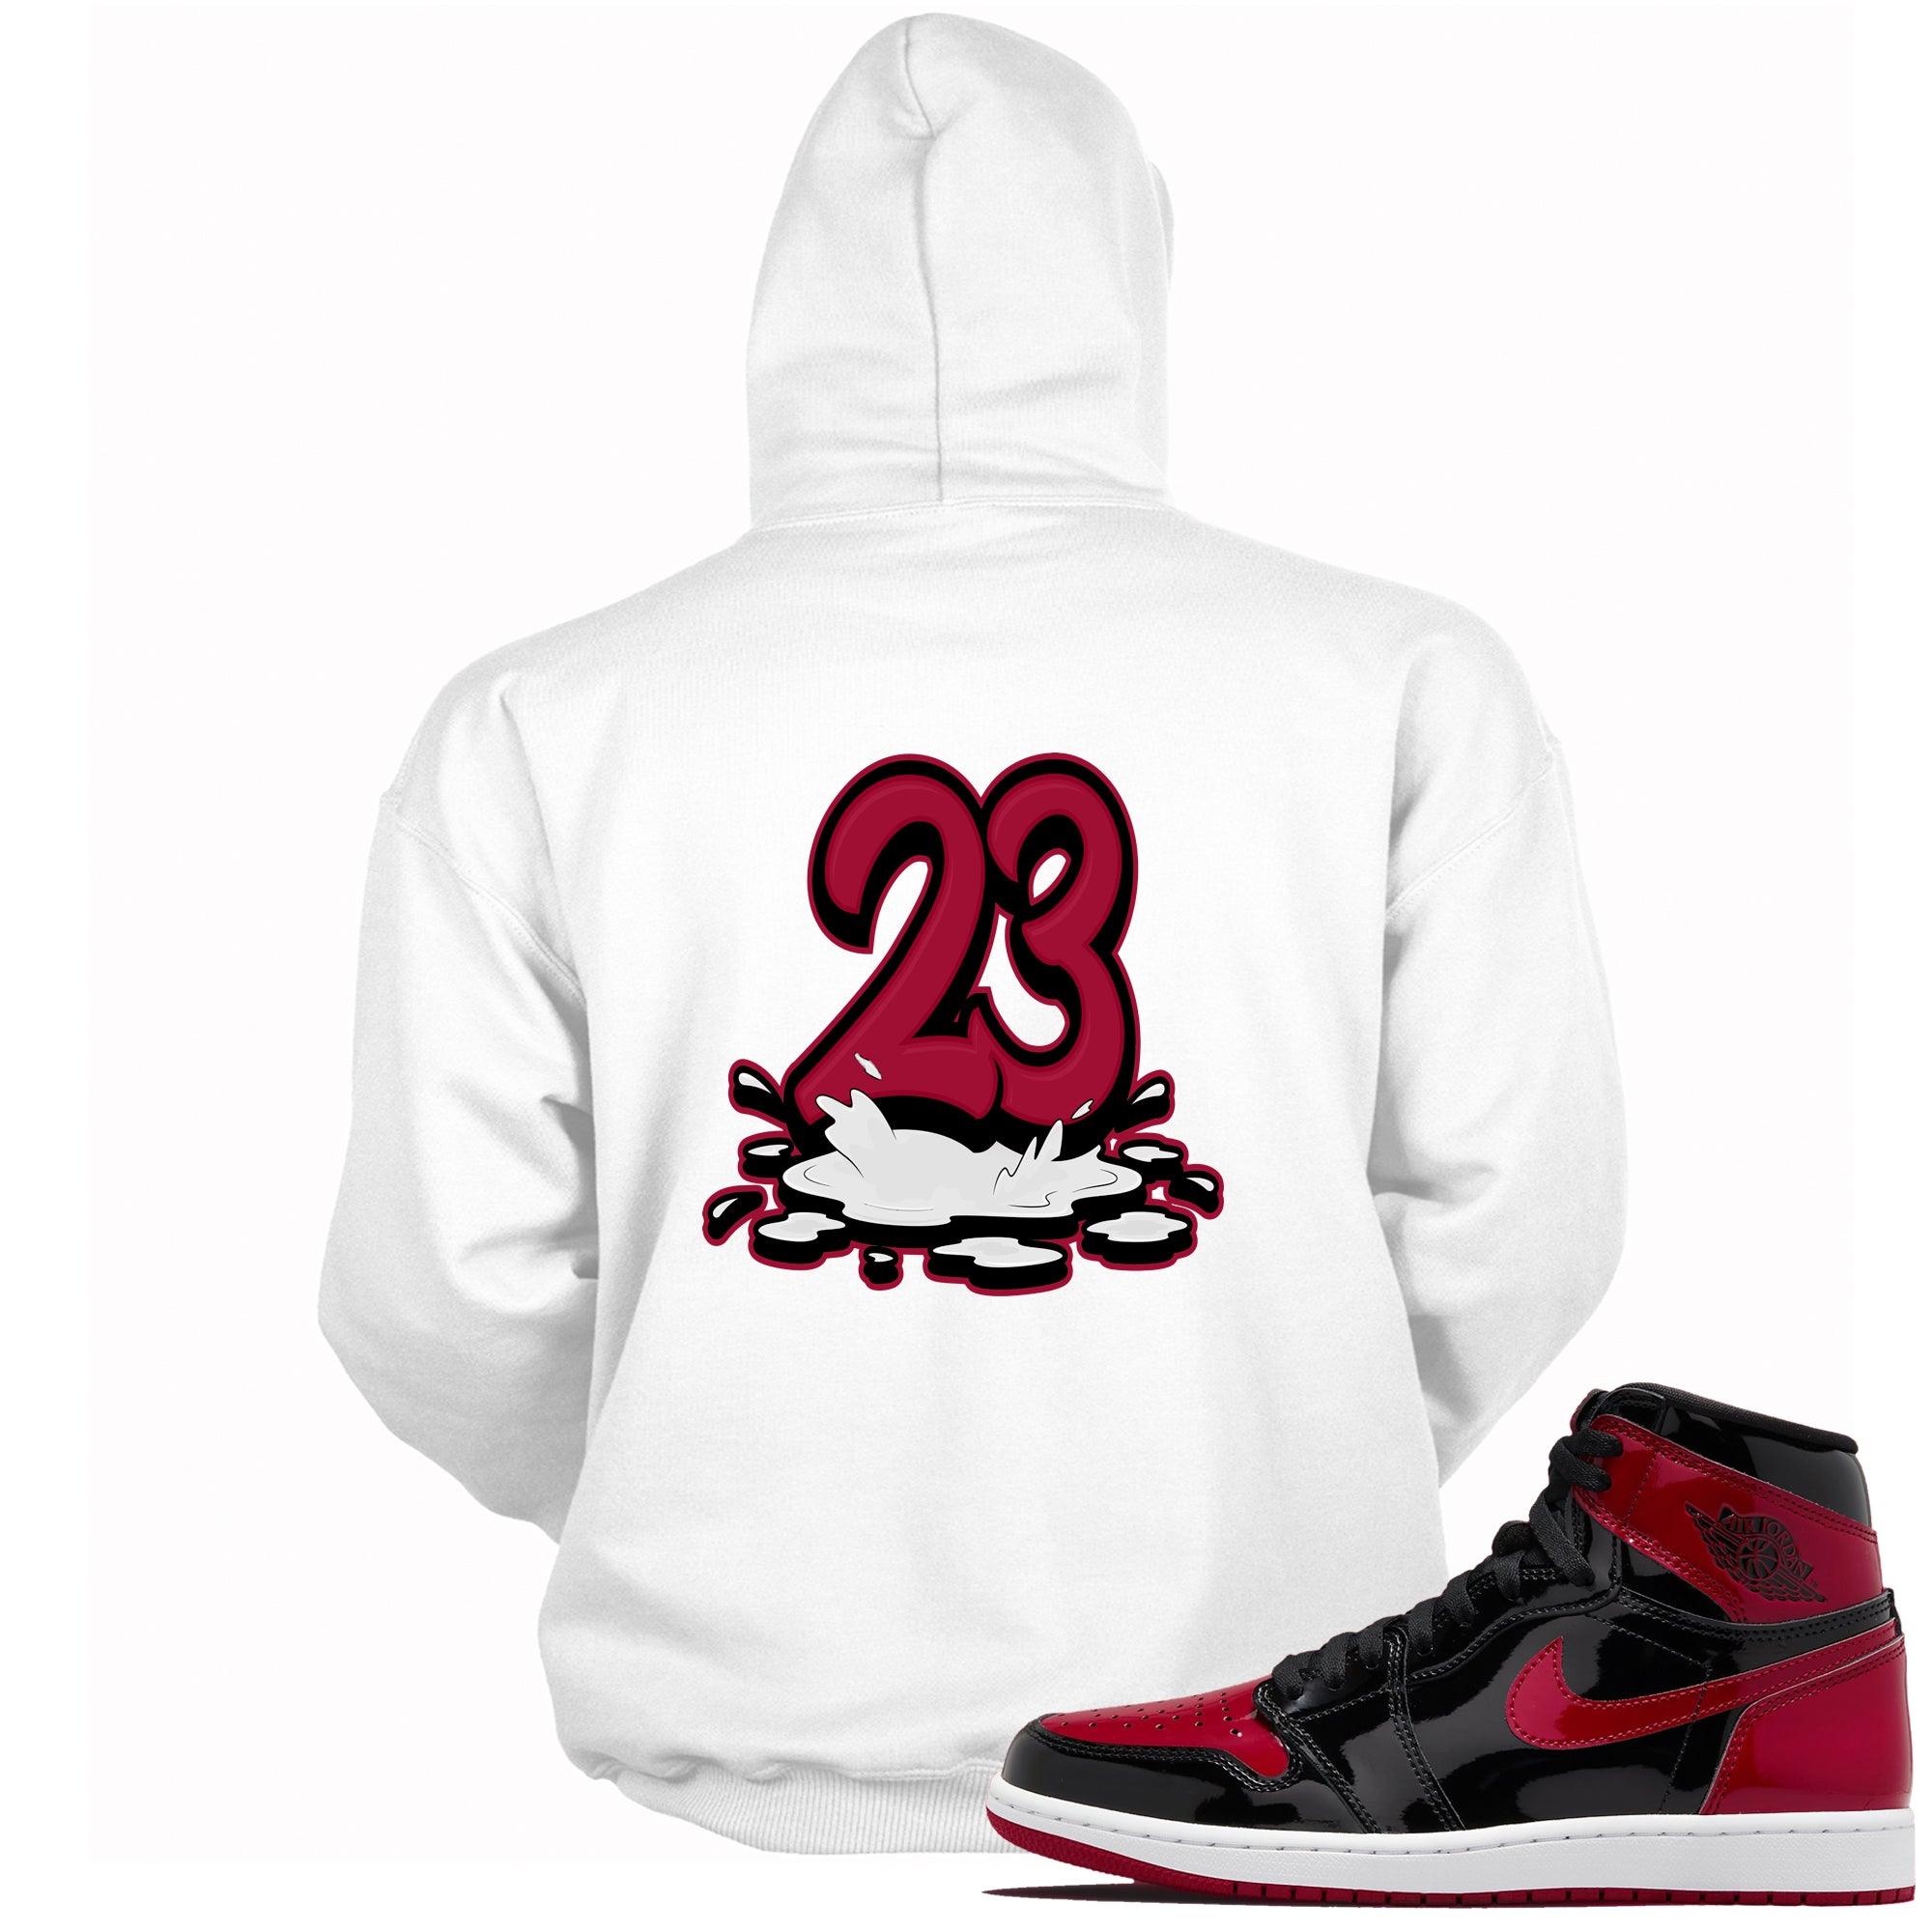 Number 23 Melting Hoodie AJ 1 Patent Leather Bred Air Holiday photo 